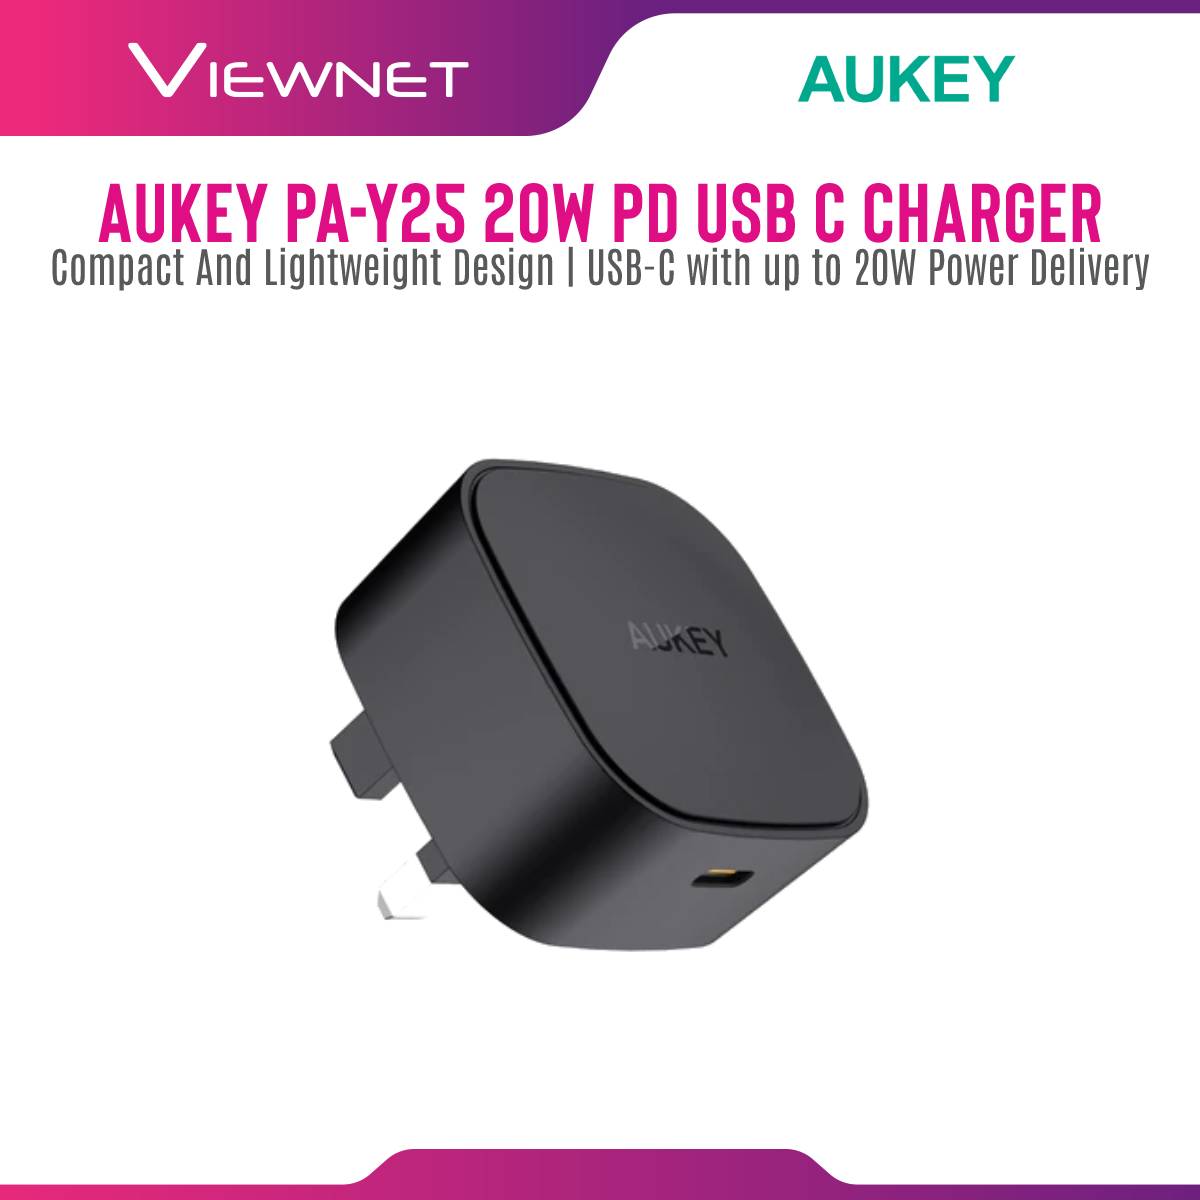 Aukey PA-Y25 20W Power Delivery PD 3.0 USB C Mini Charger 20W USB-C Nano fast Chargers